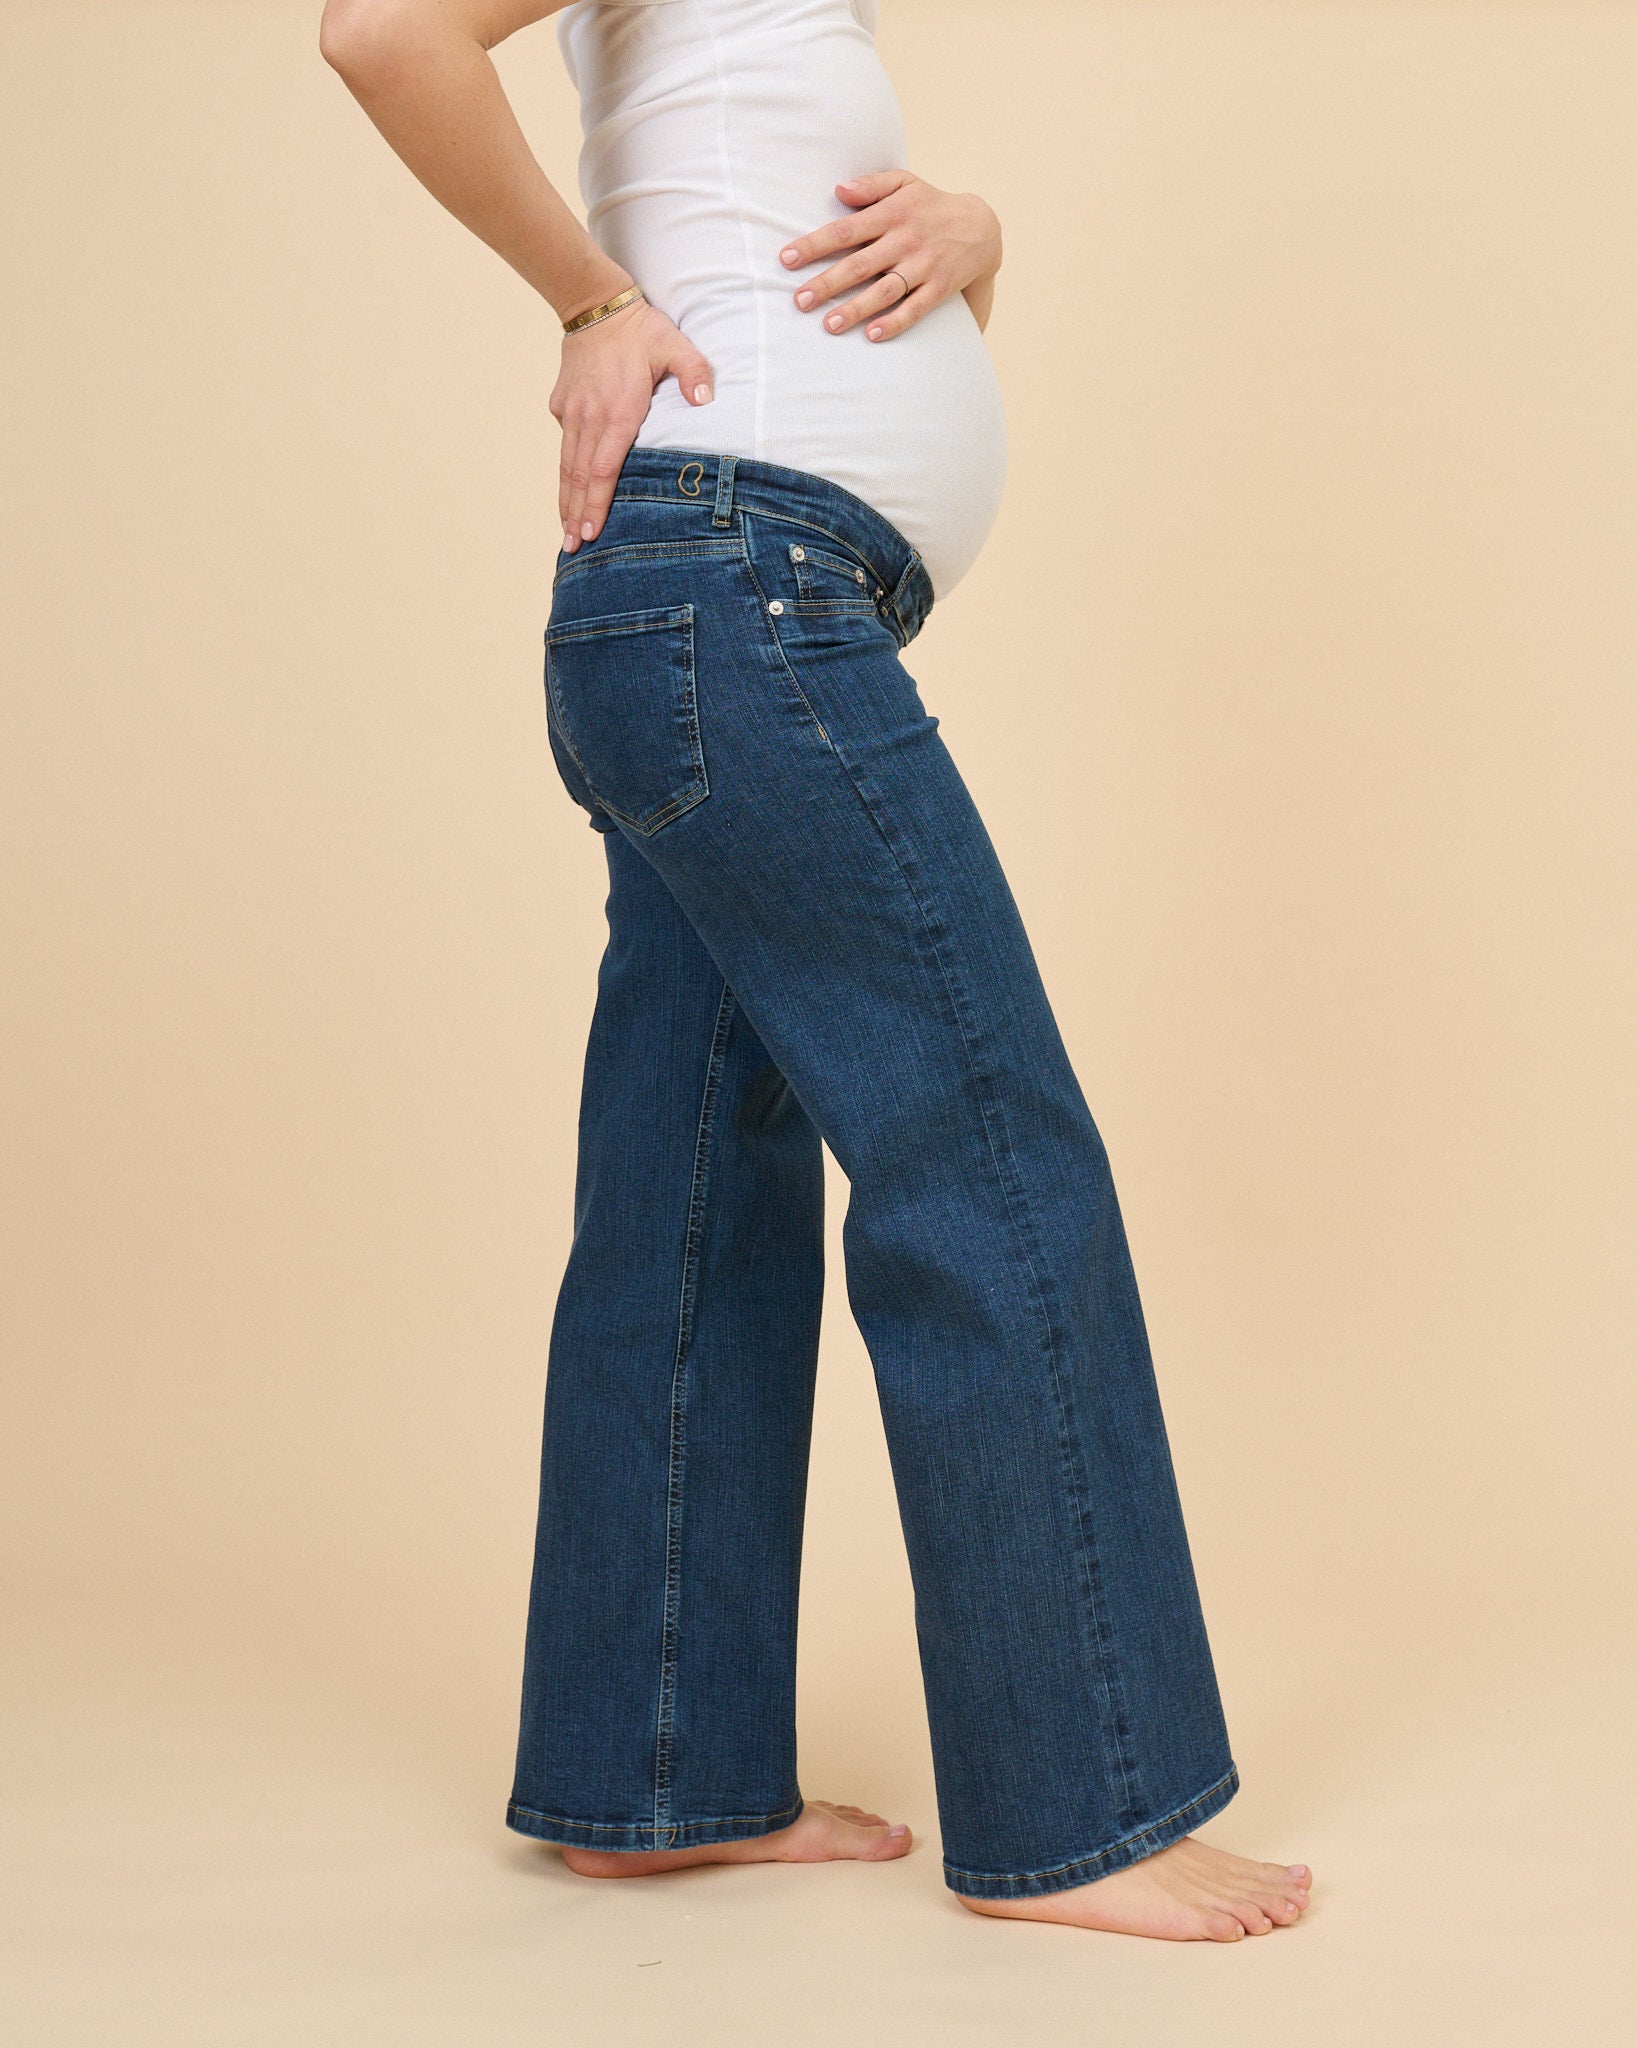 Pregnancy Tops and Tees Maternity Wear | Cotton Maternity Tees